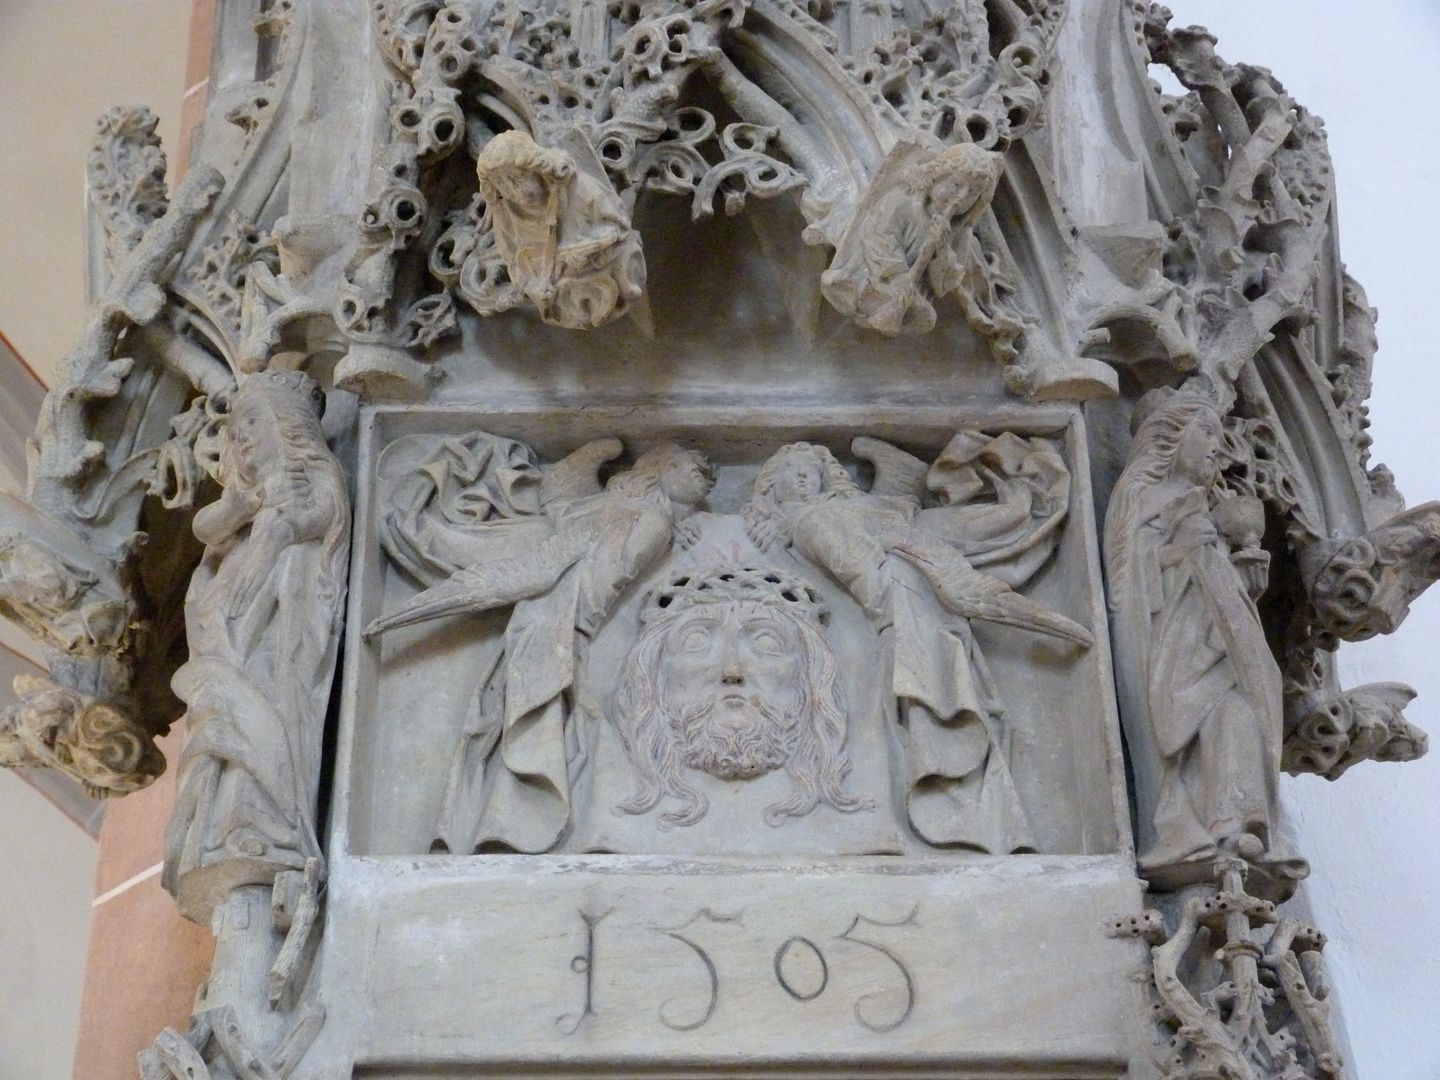 Sacrament house in Schwabach South side, relief panel above the tabernacle with Veronica's handkerchief and the date 1505